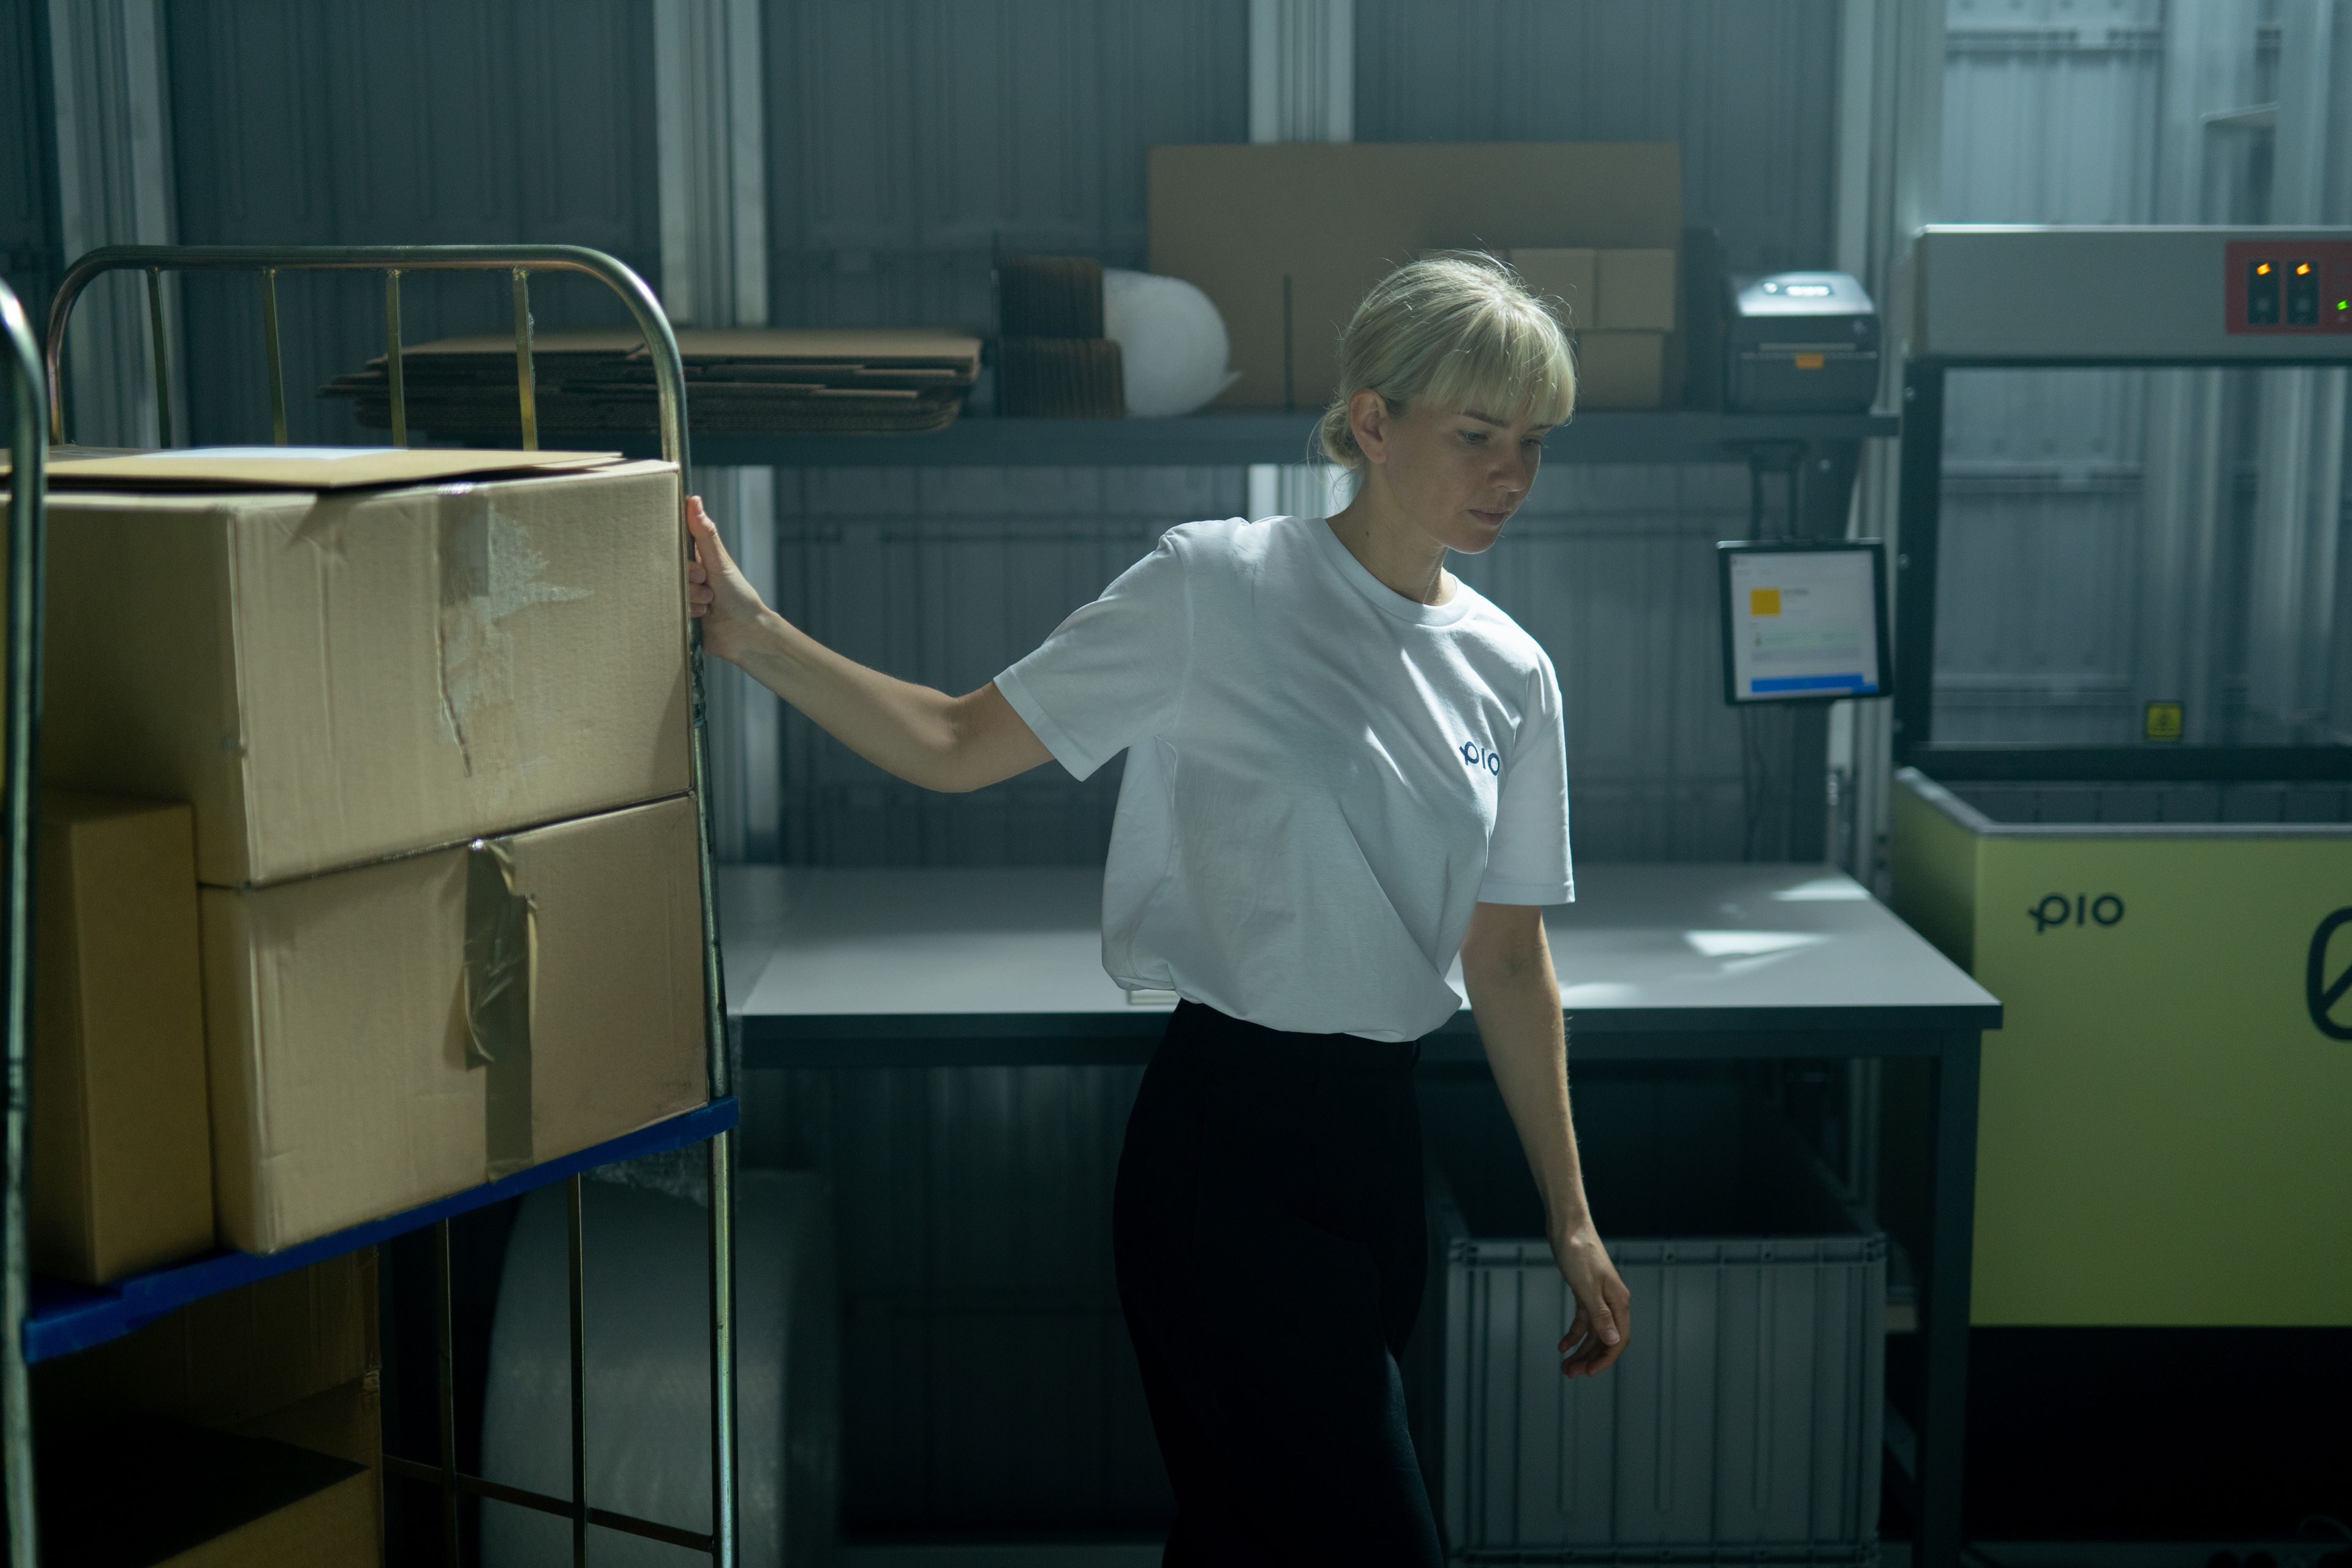 A woman working in a warehouse handling a cart full of packages.